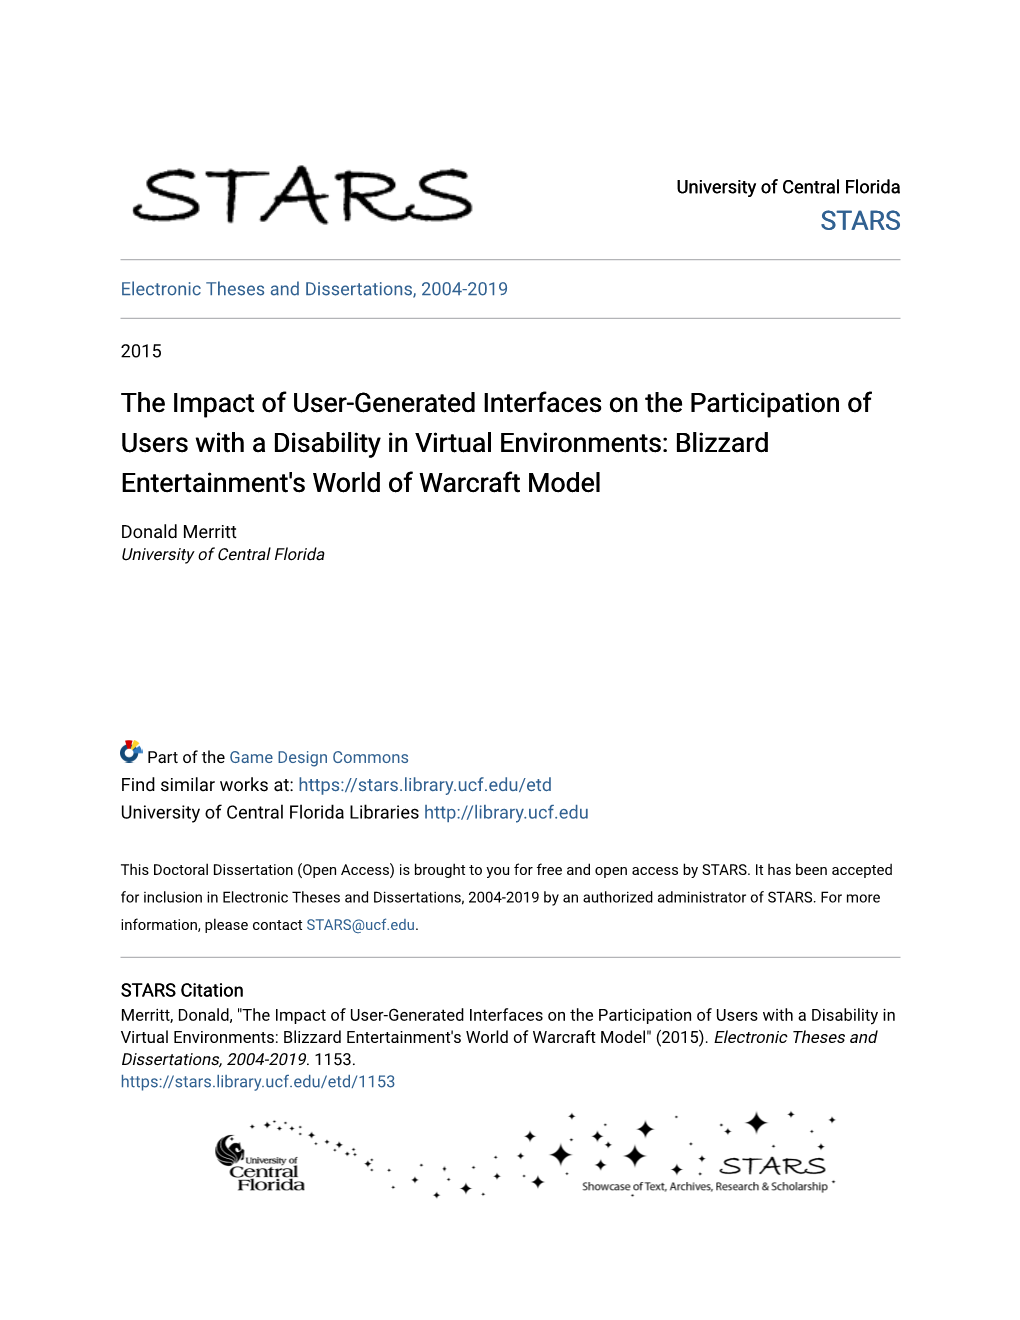 The Impact of User-Generated Interfaces on the Participation of Users with a Disability in Virtual Environments: Blizzard Entertainment's World of Warcraft Model